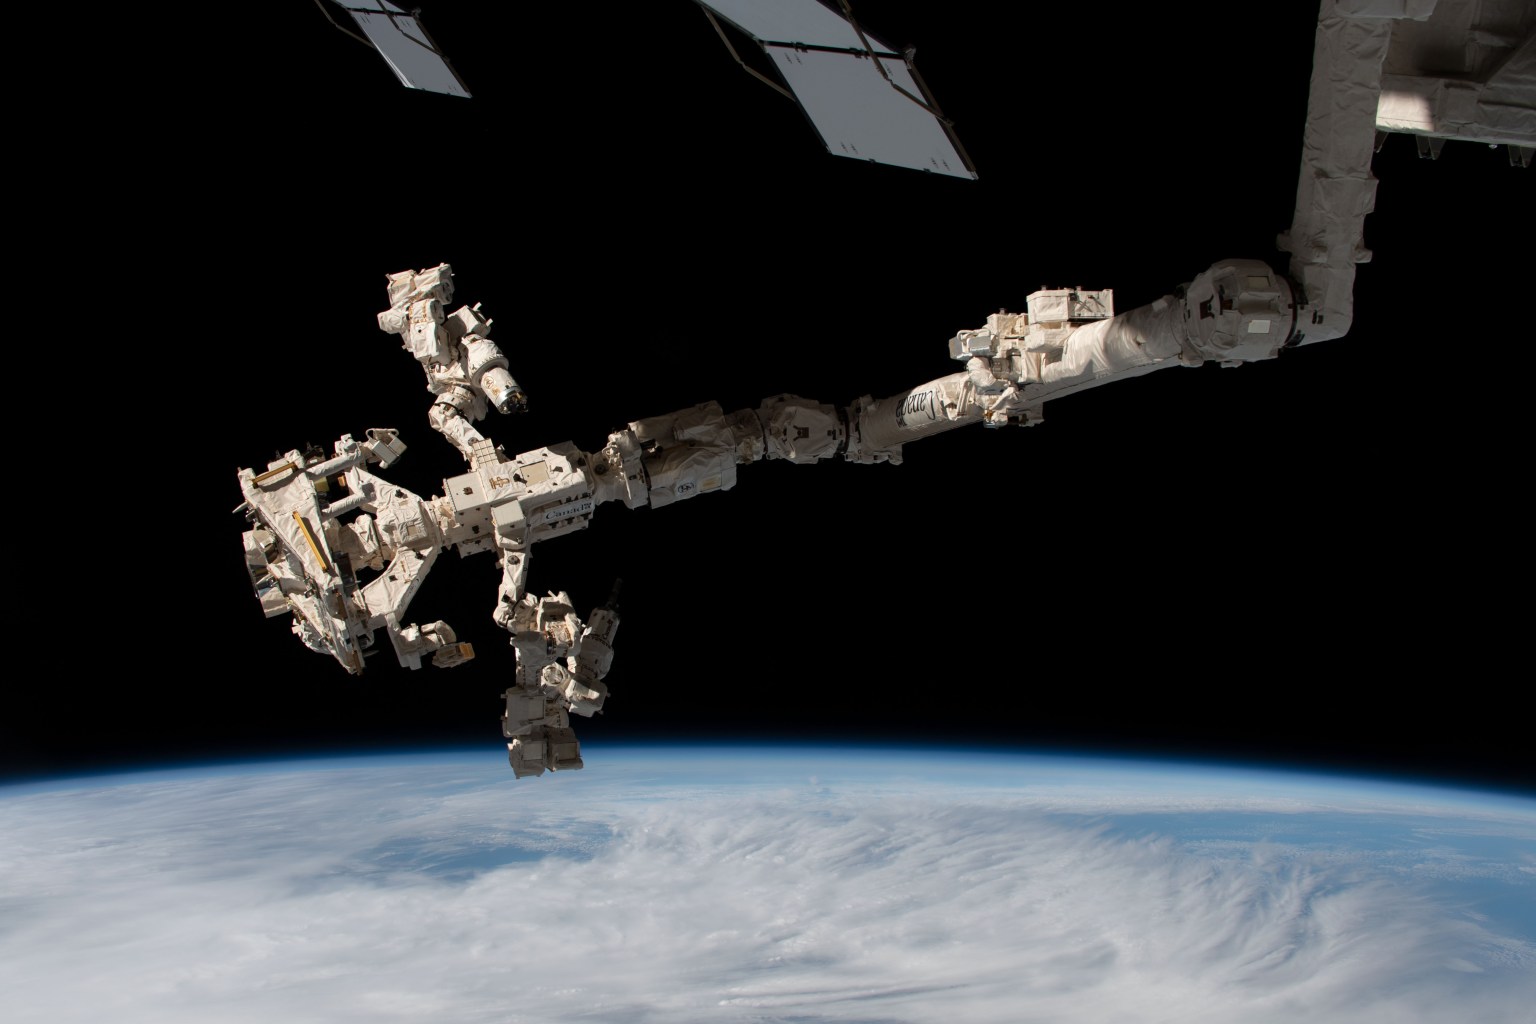 Dextre, the International Space Station's fine-tuned robotic hand, is attached to the Canadarm2 robotic arm as the orbiting lab flew 269 miles above the Falkland Islands (Islas Malvinas) in the Atlantic Ocean off the coast of southern Argentina.